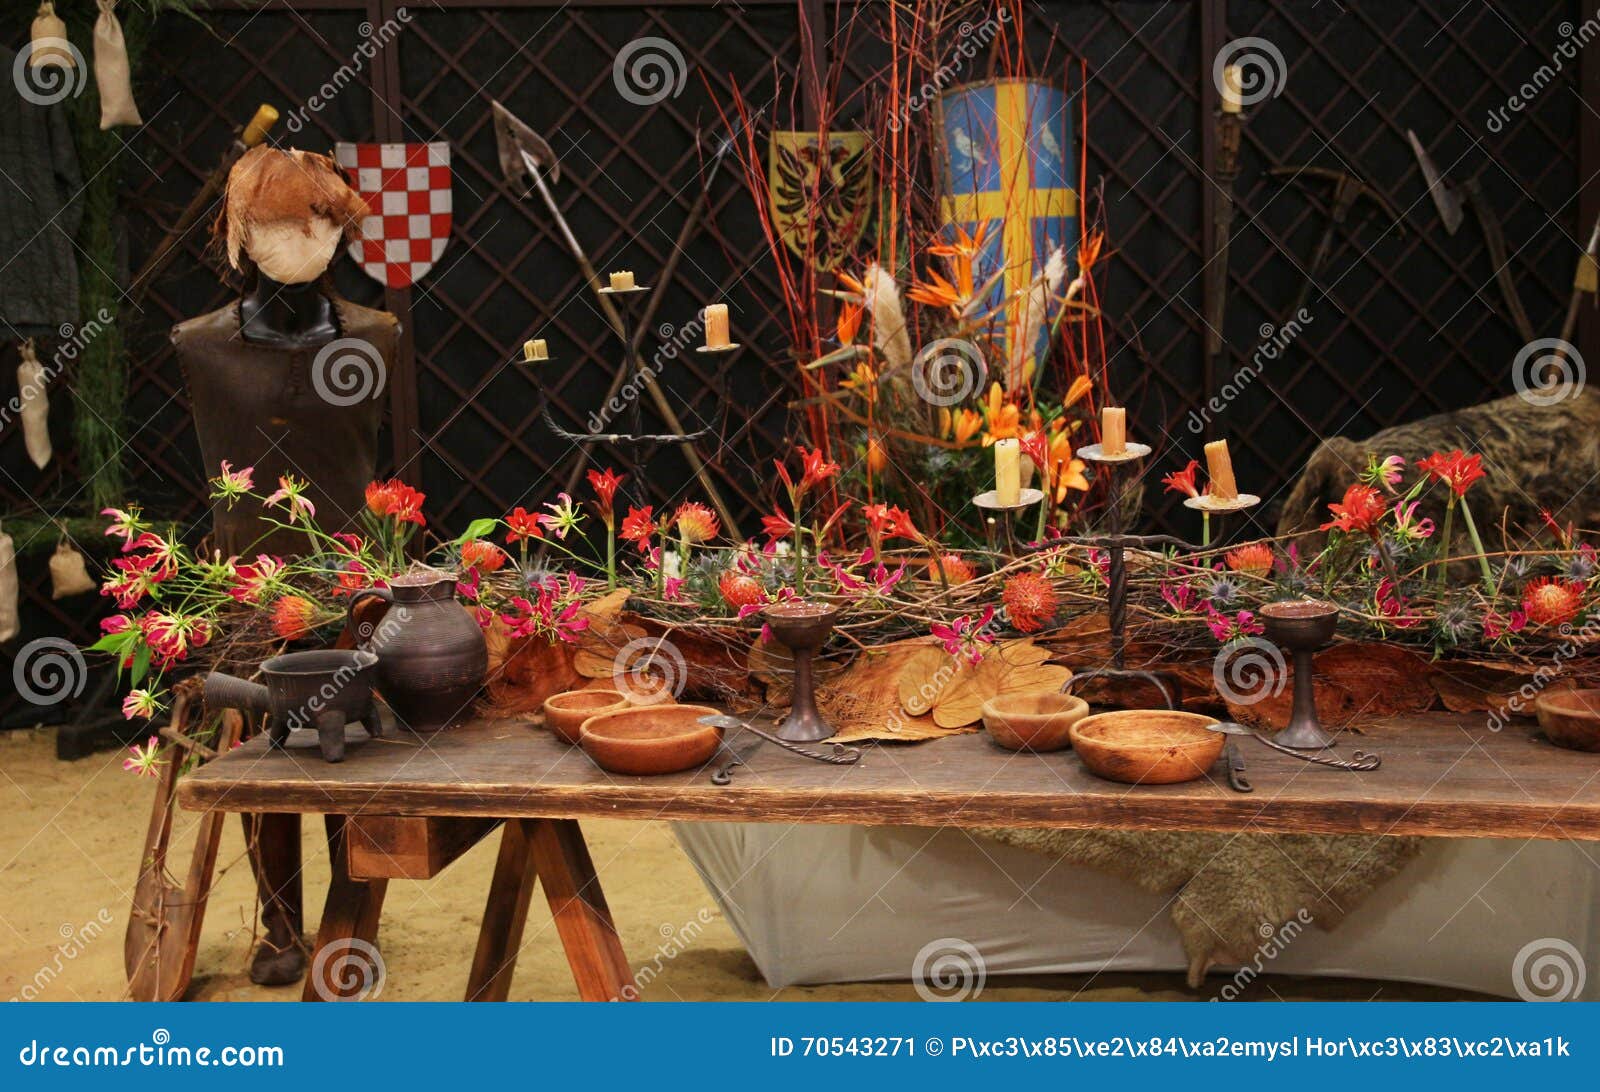 Decoration Medieval Feast in the Castle Stock Image - Image of elegant